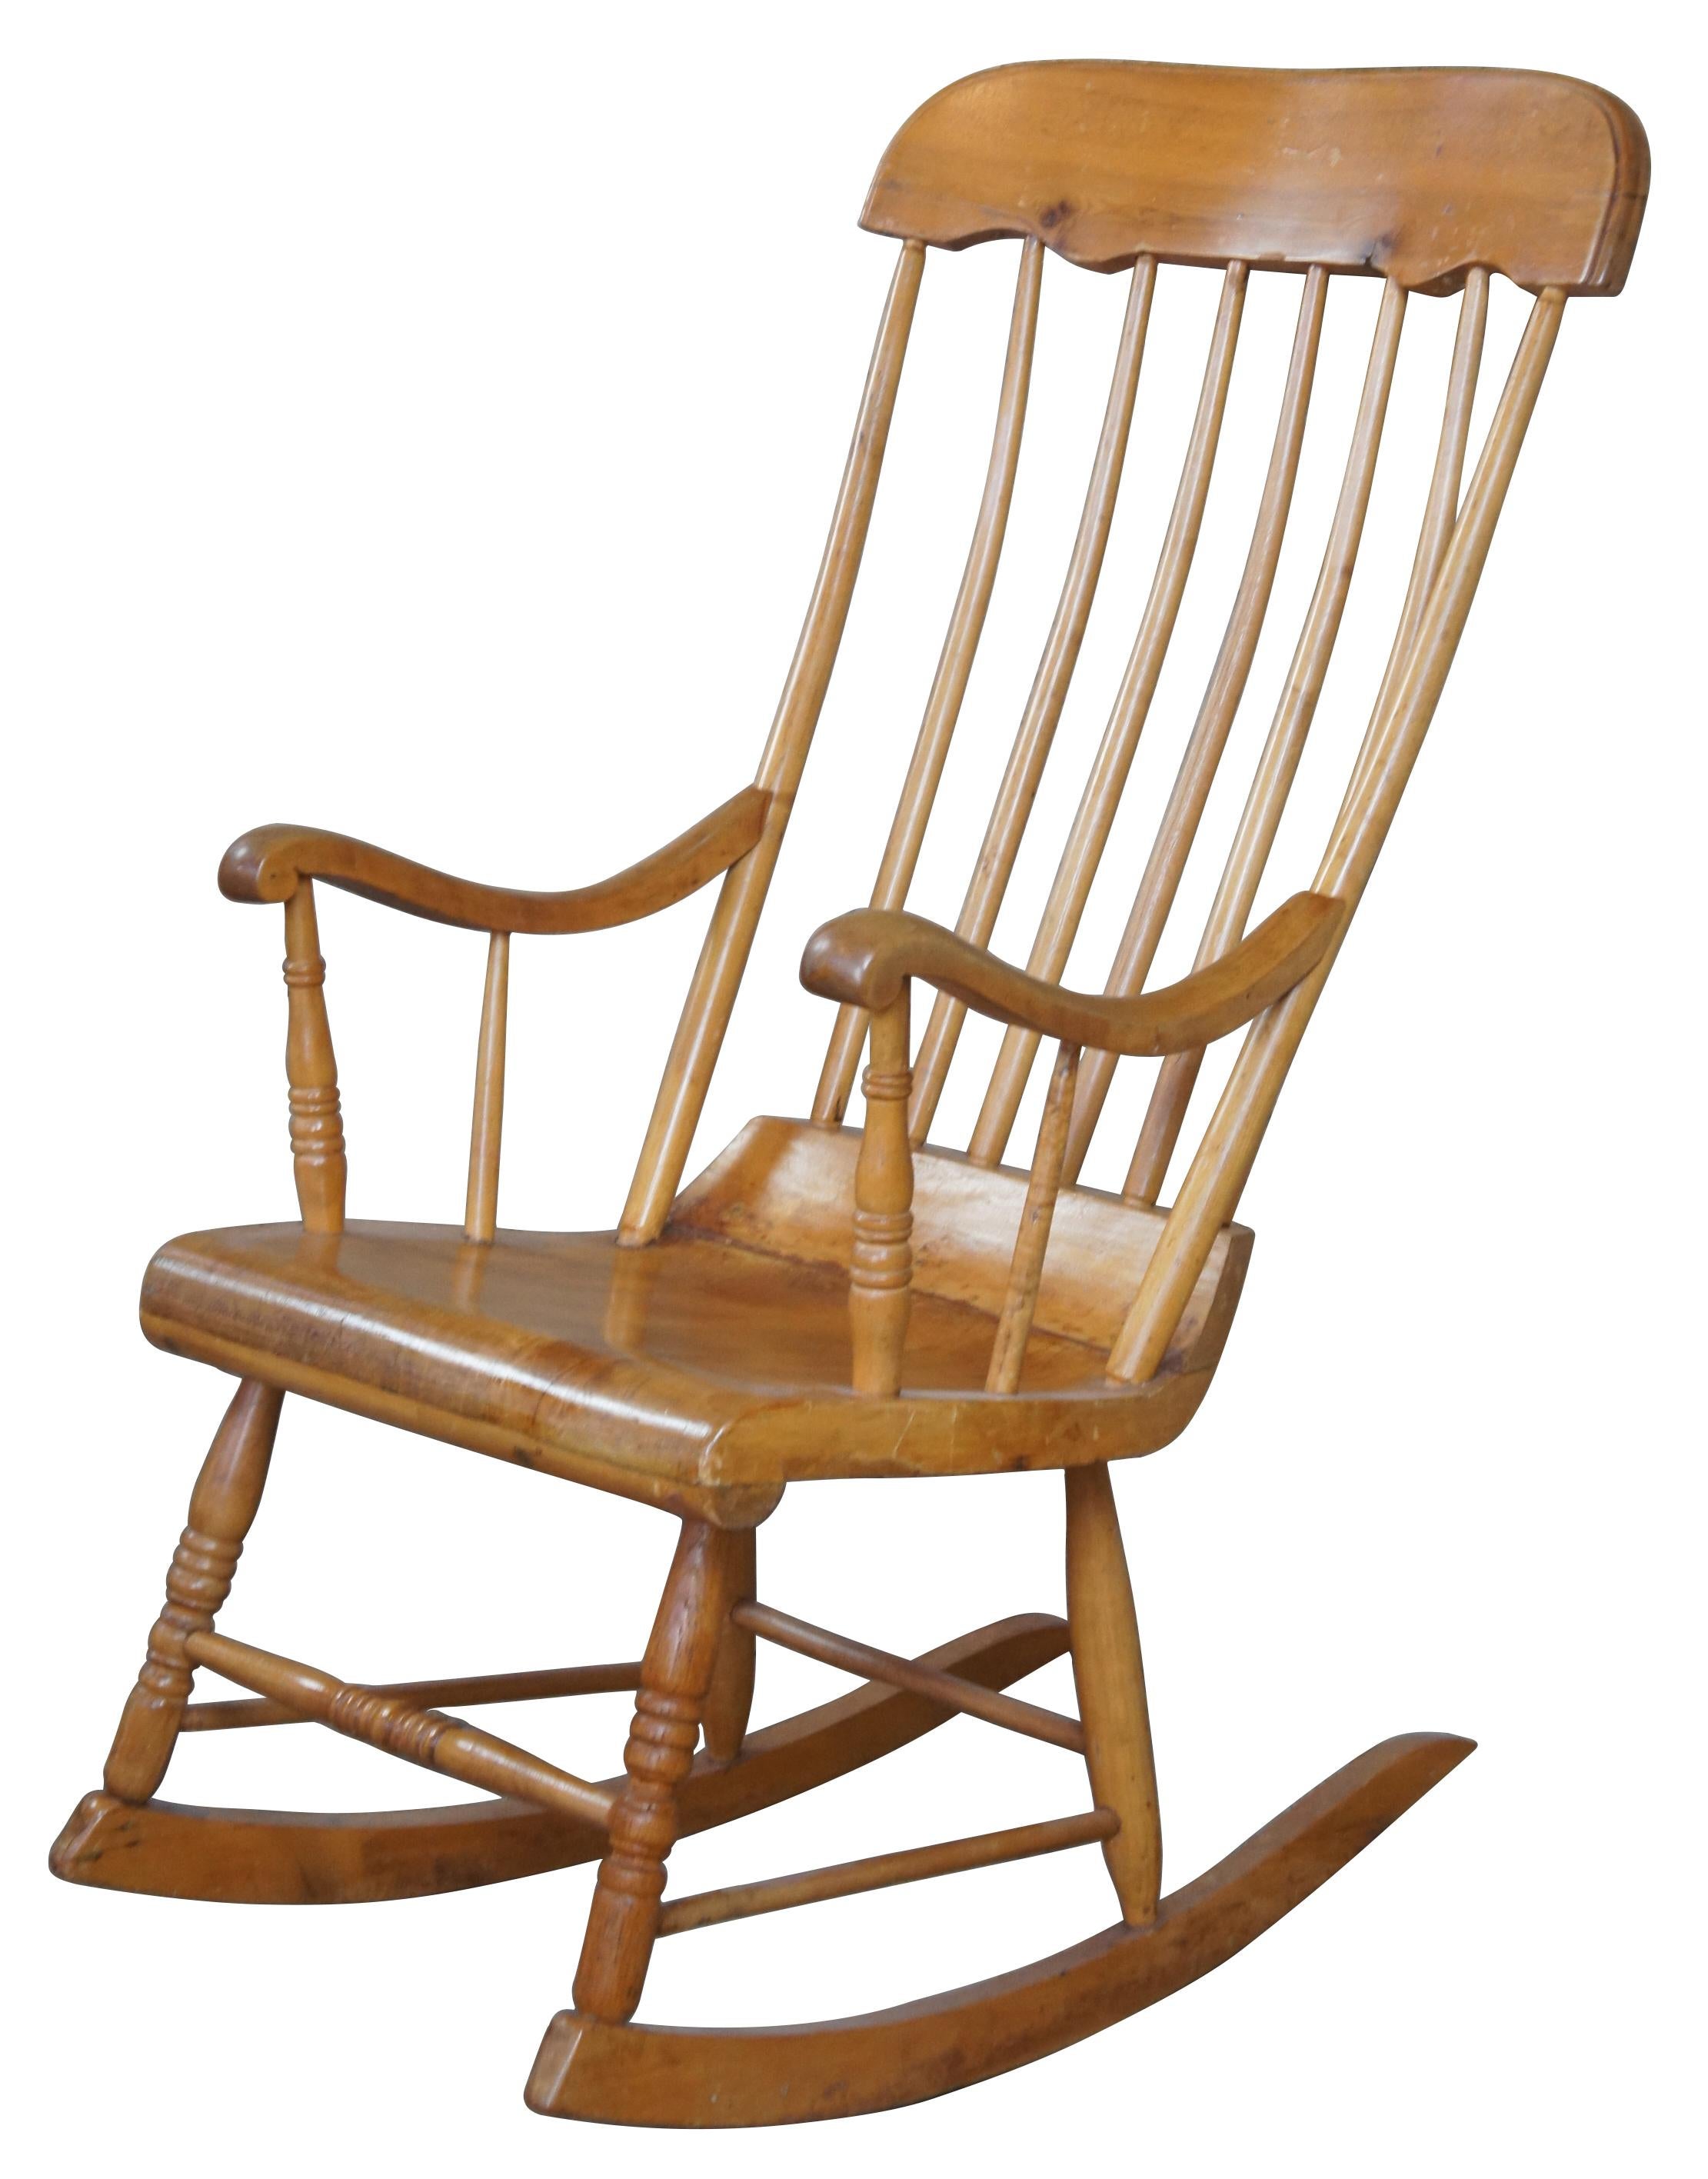 Antique artisinal or craftsman made Windsor style rocking chair. Made from pine with a spindle back and contoured arms.
  